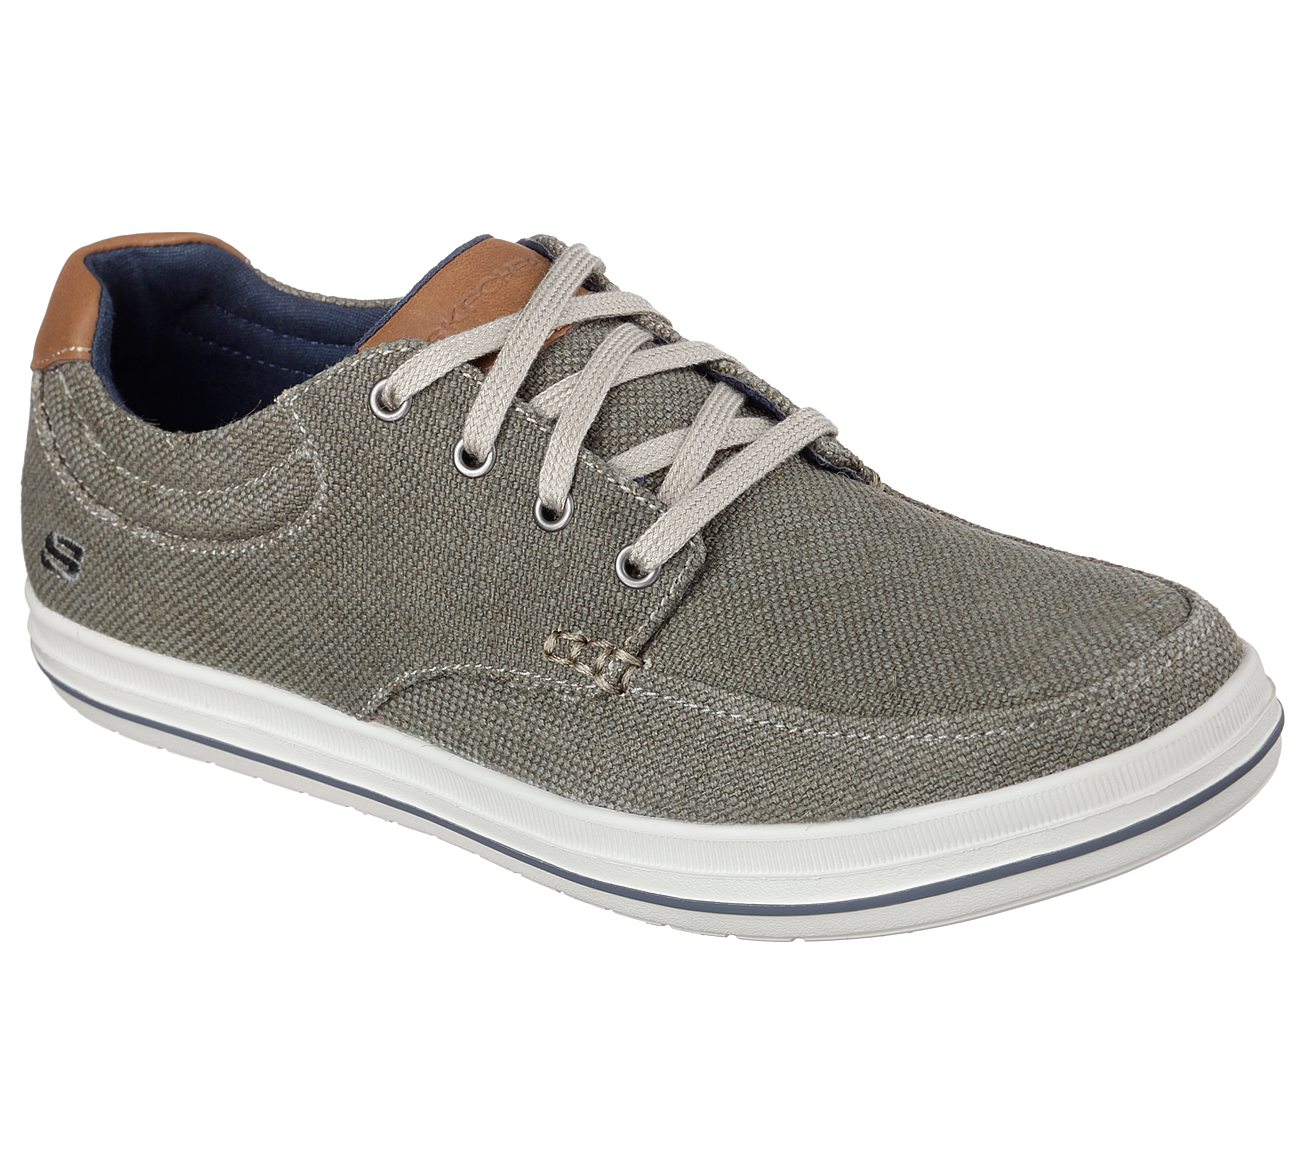 Buy SKECHERS Relaxed Fit: Define - Soden Modern Comfort Shoes